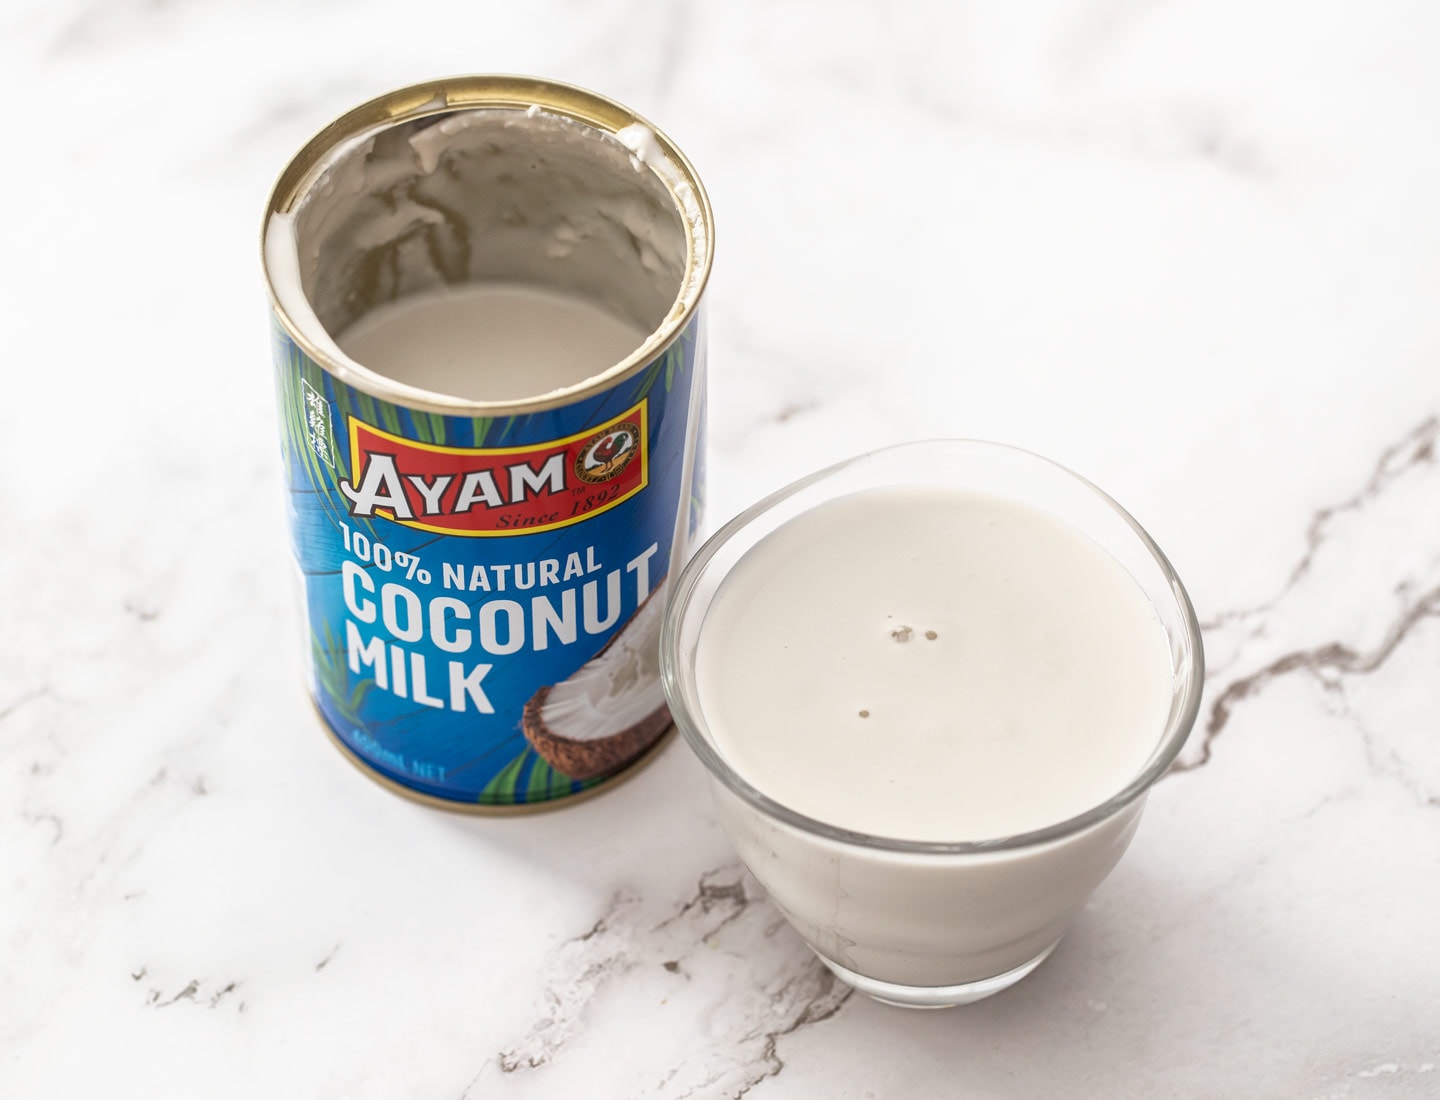 A can of coconut milk, next to a glass full of it.